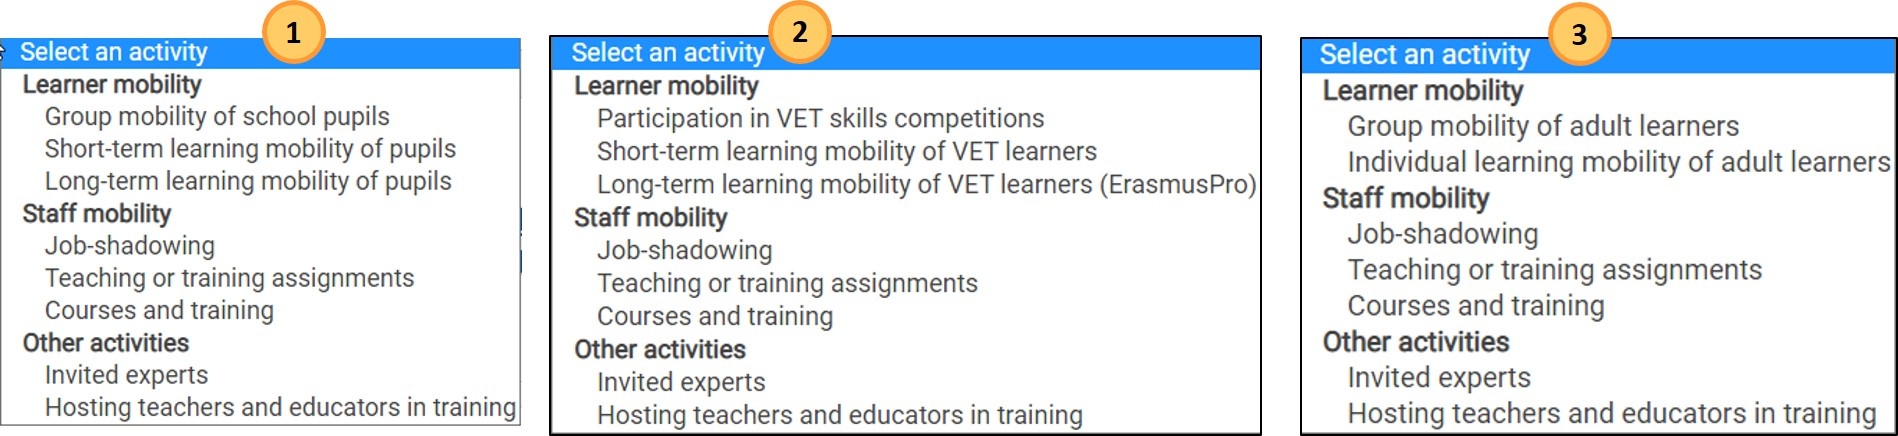 Available Activity tipes for SCH, VET and ADU